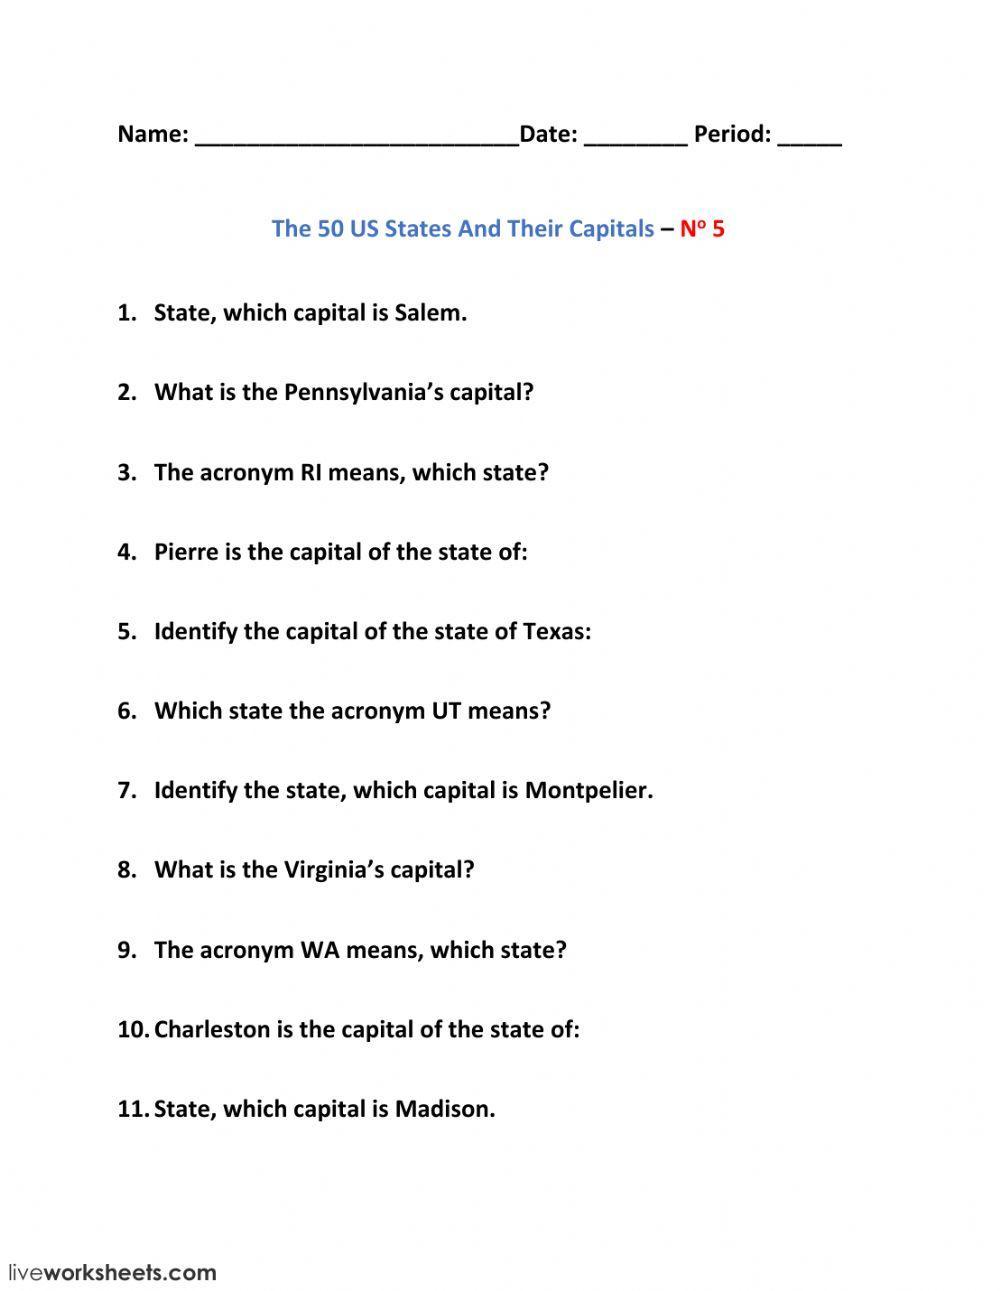 The 50 US States And Their Capitals – No 5